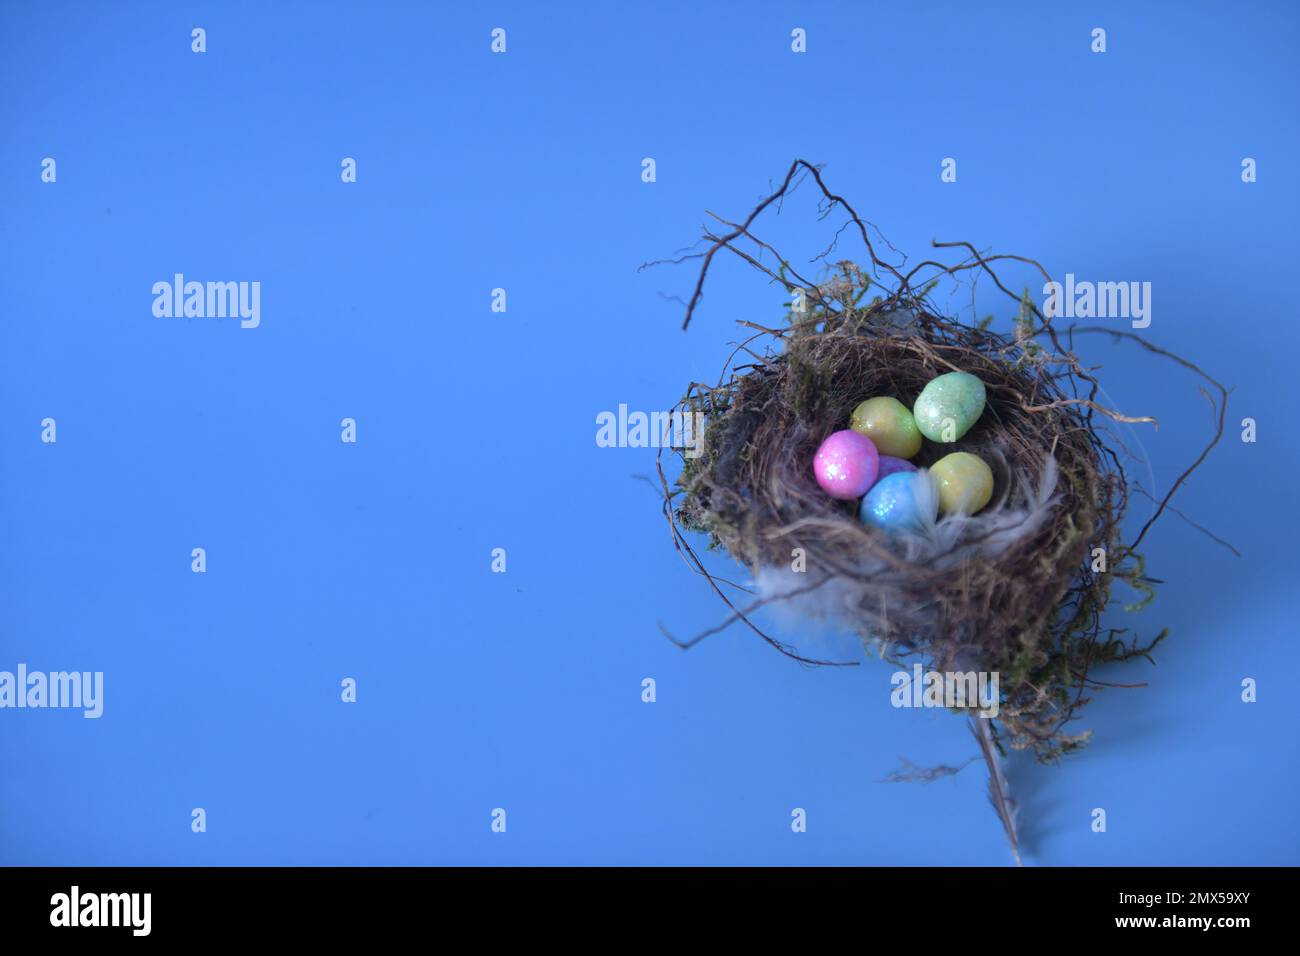 Real bird's nest with tiny colorful Easter eggs. Horizontal photo with blue bacground and copy space to the left. Stock Photo